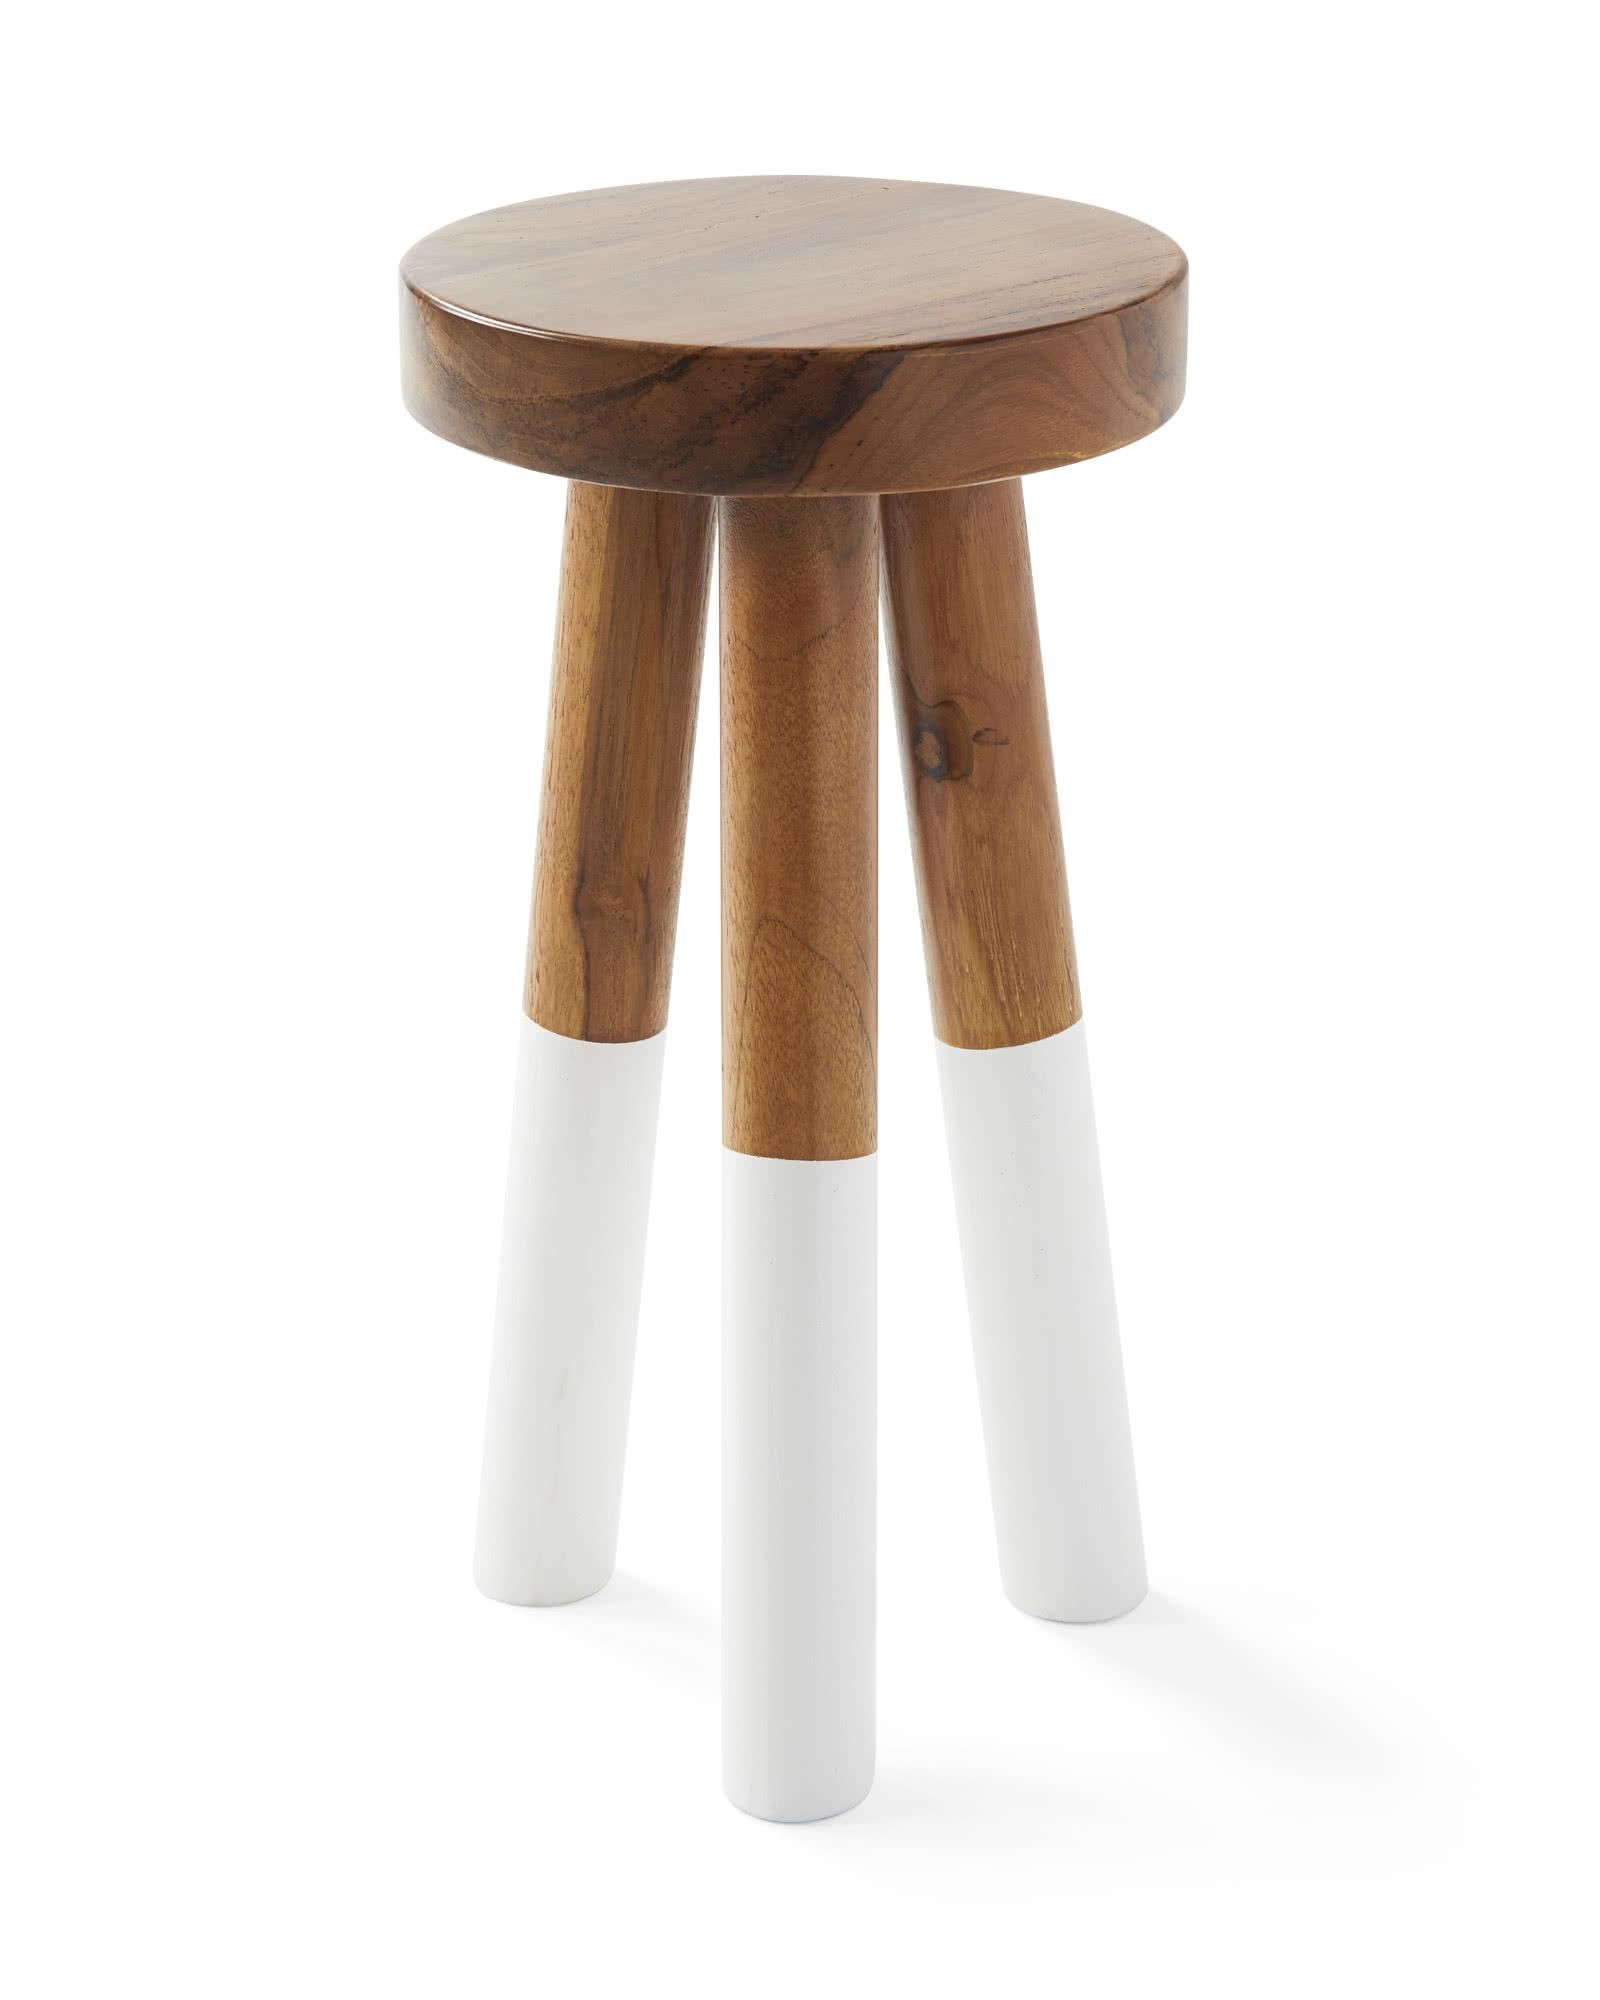 Dip-Dyed Stools | Serena and Lily